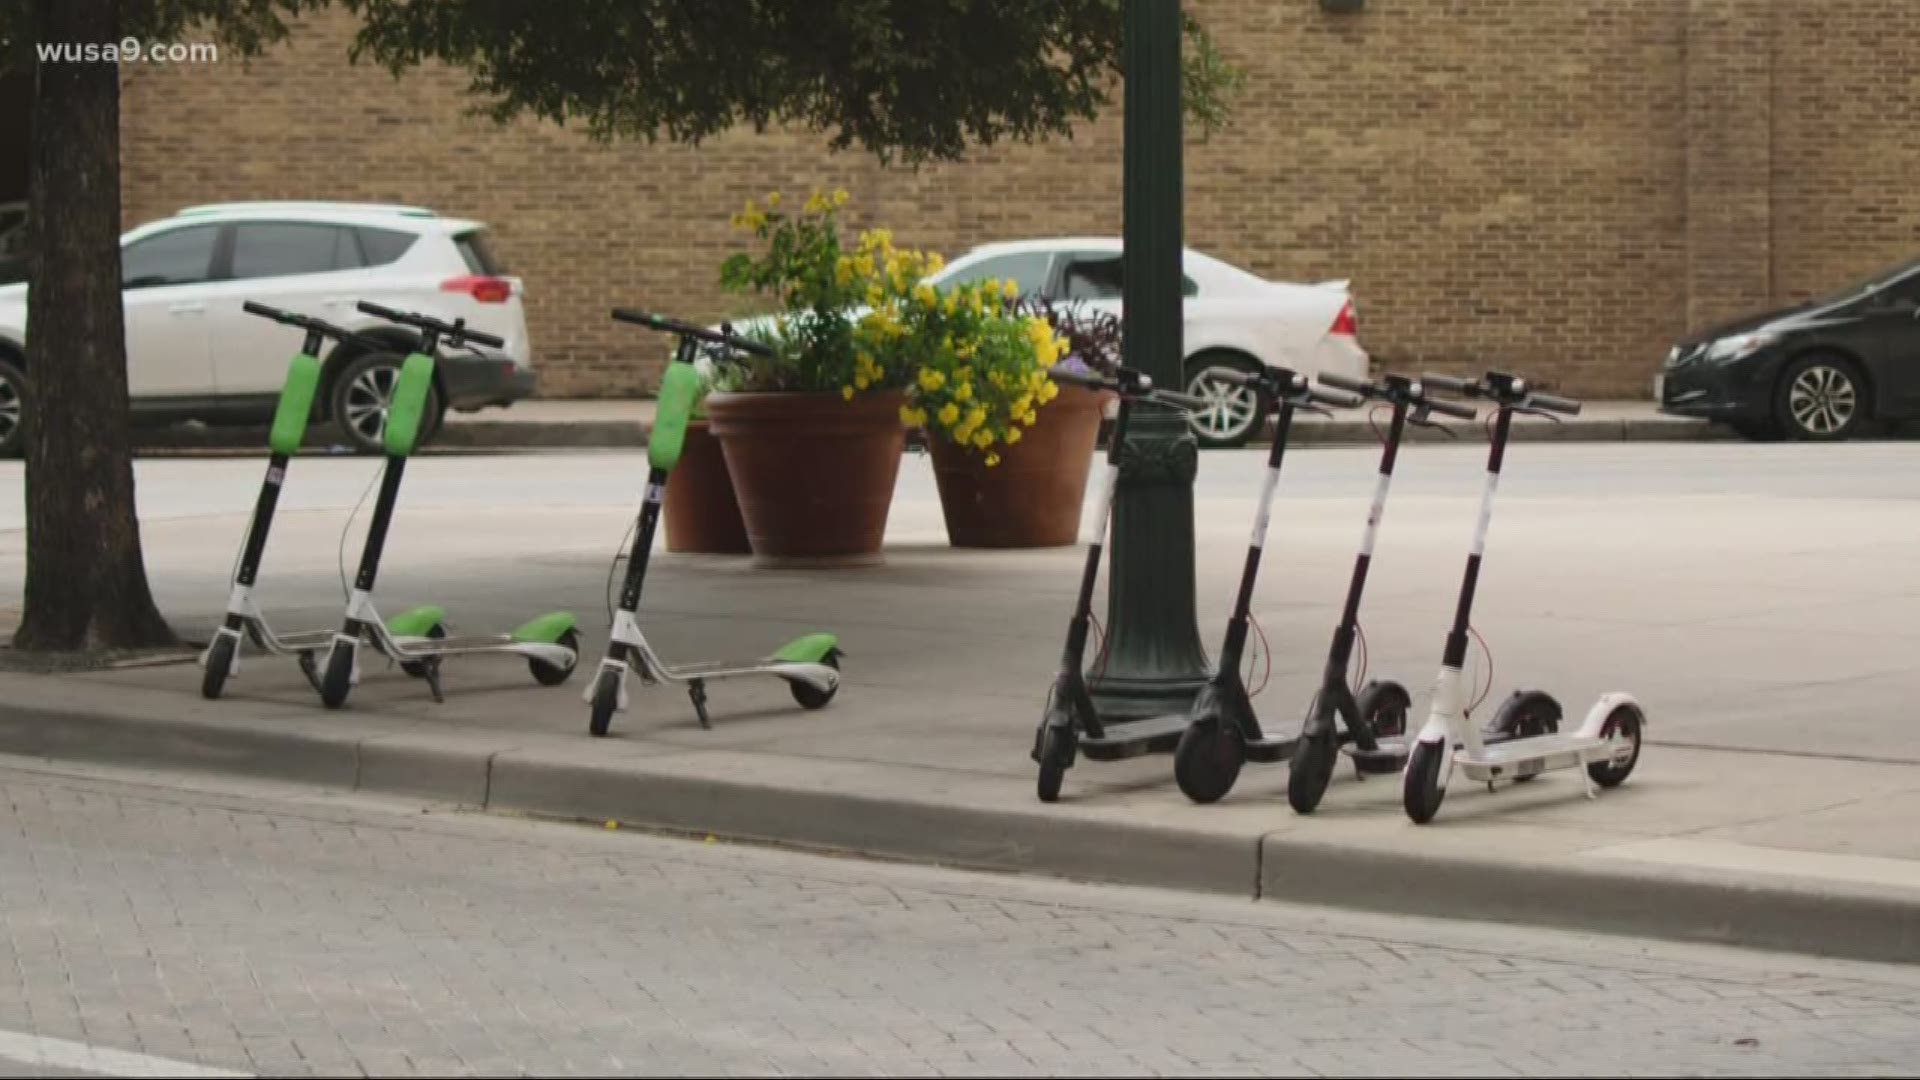 Electric scooters and bikes are a big deal in DC.
But one viewer wanted to know is it actually legal to ride scooters and bicycles on city walkways?